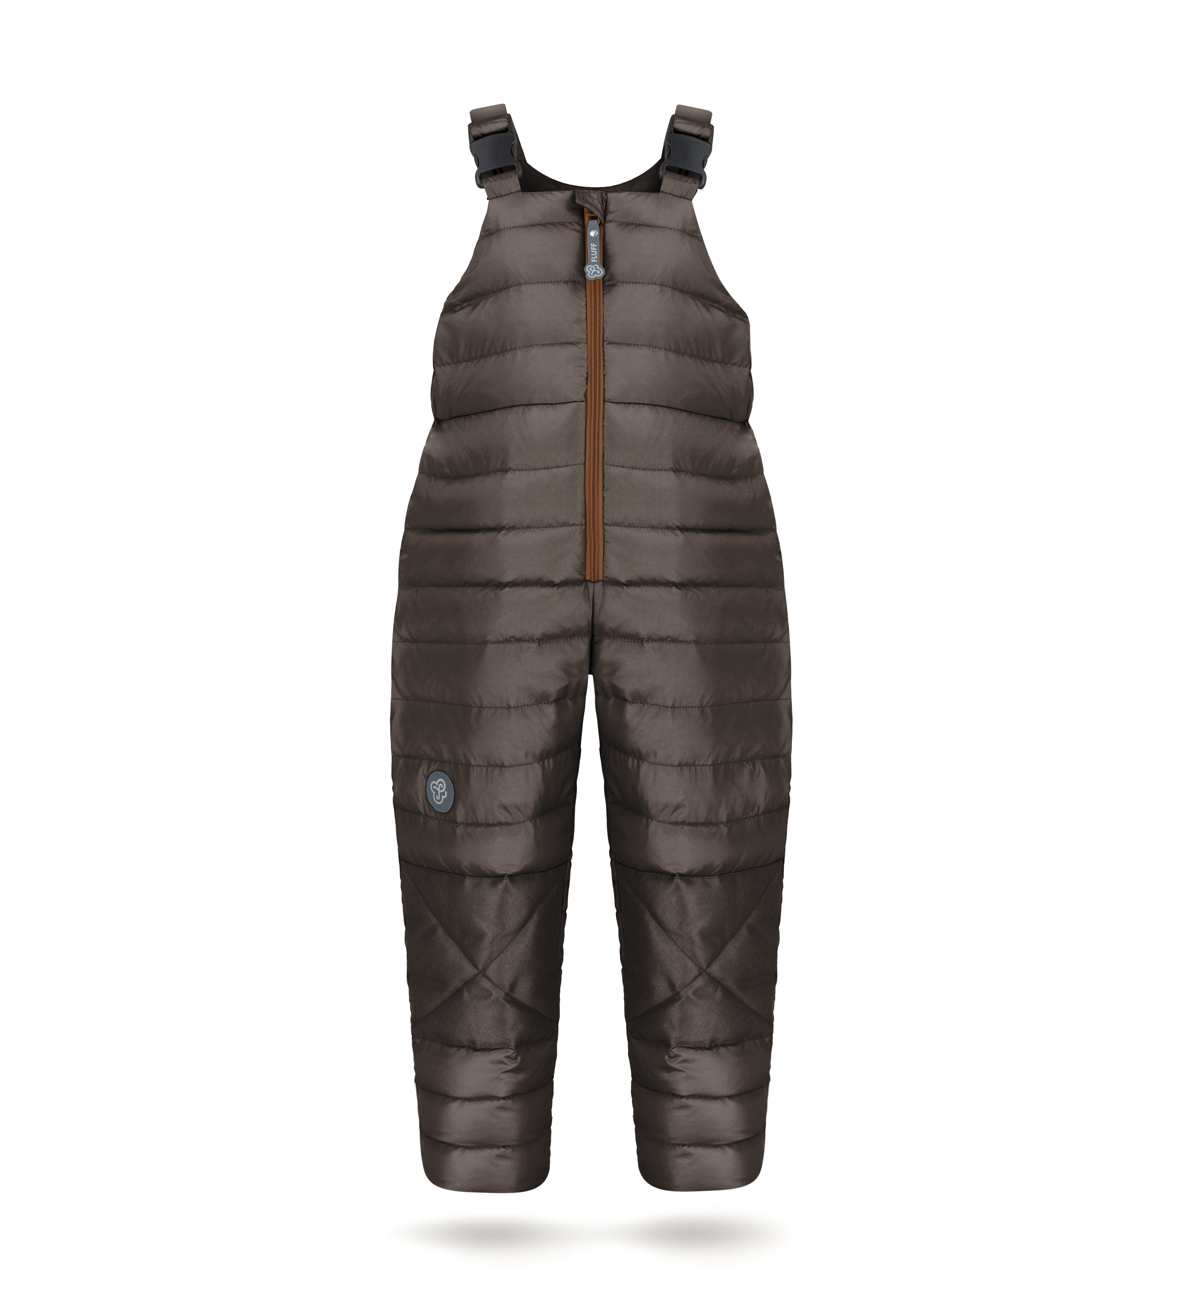 Down kids overall dungarees, front side, Marron Glace